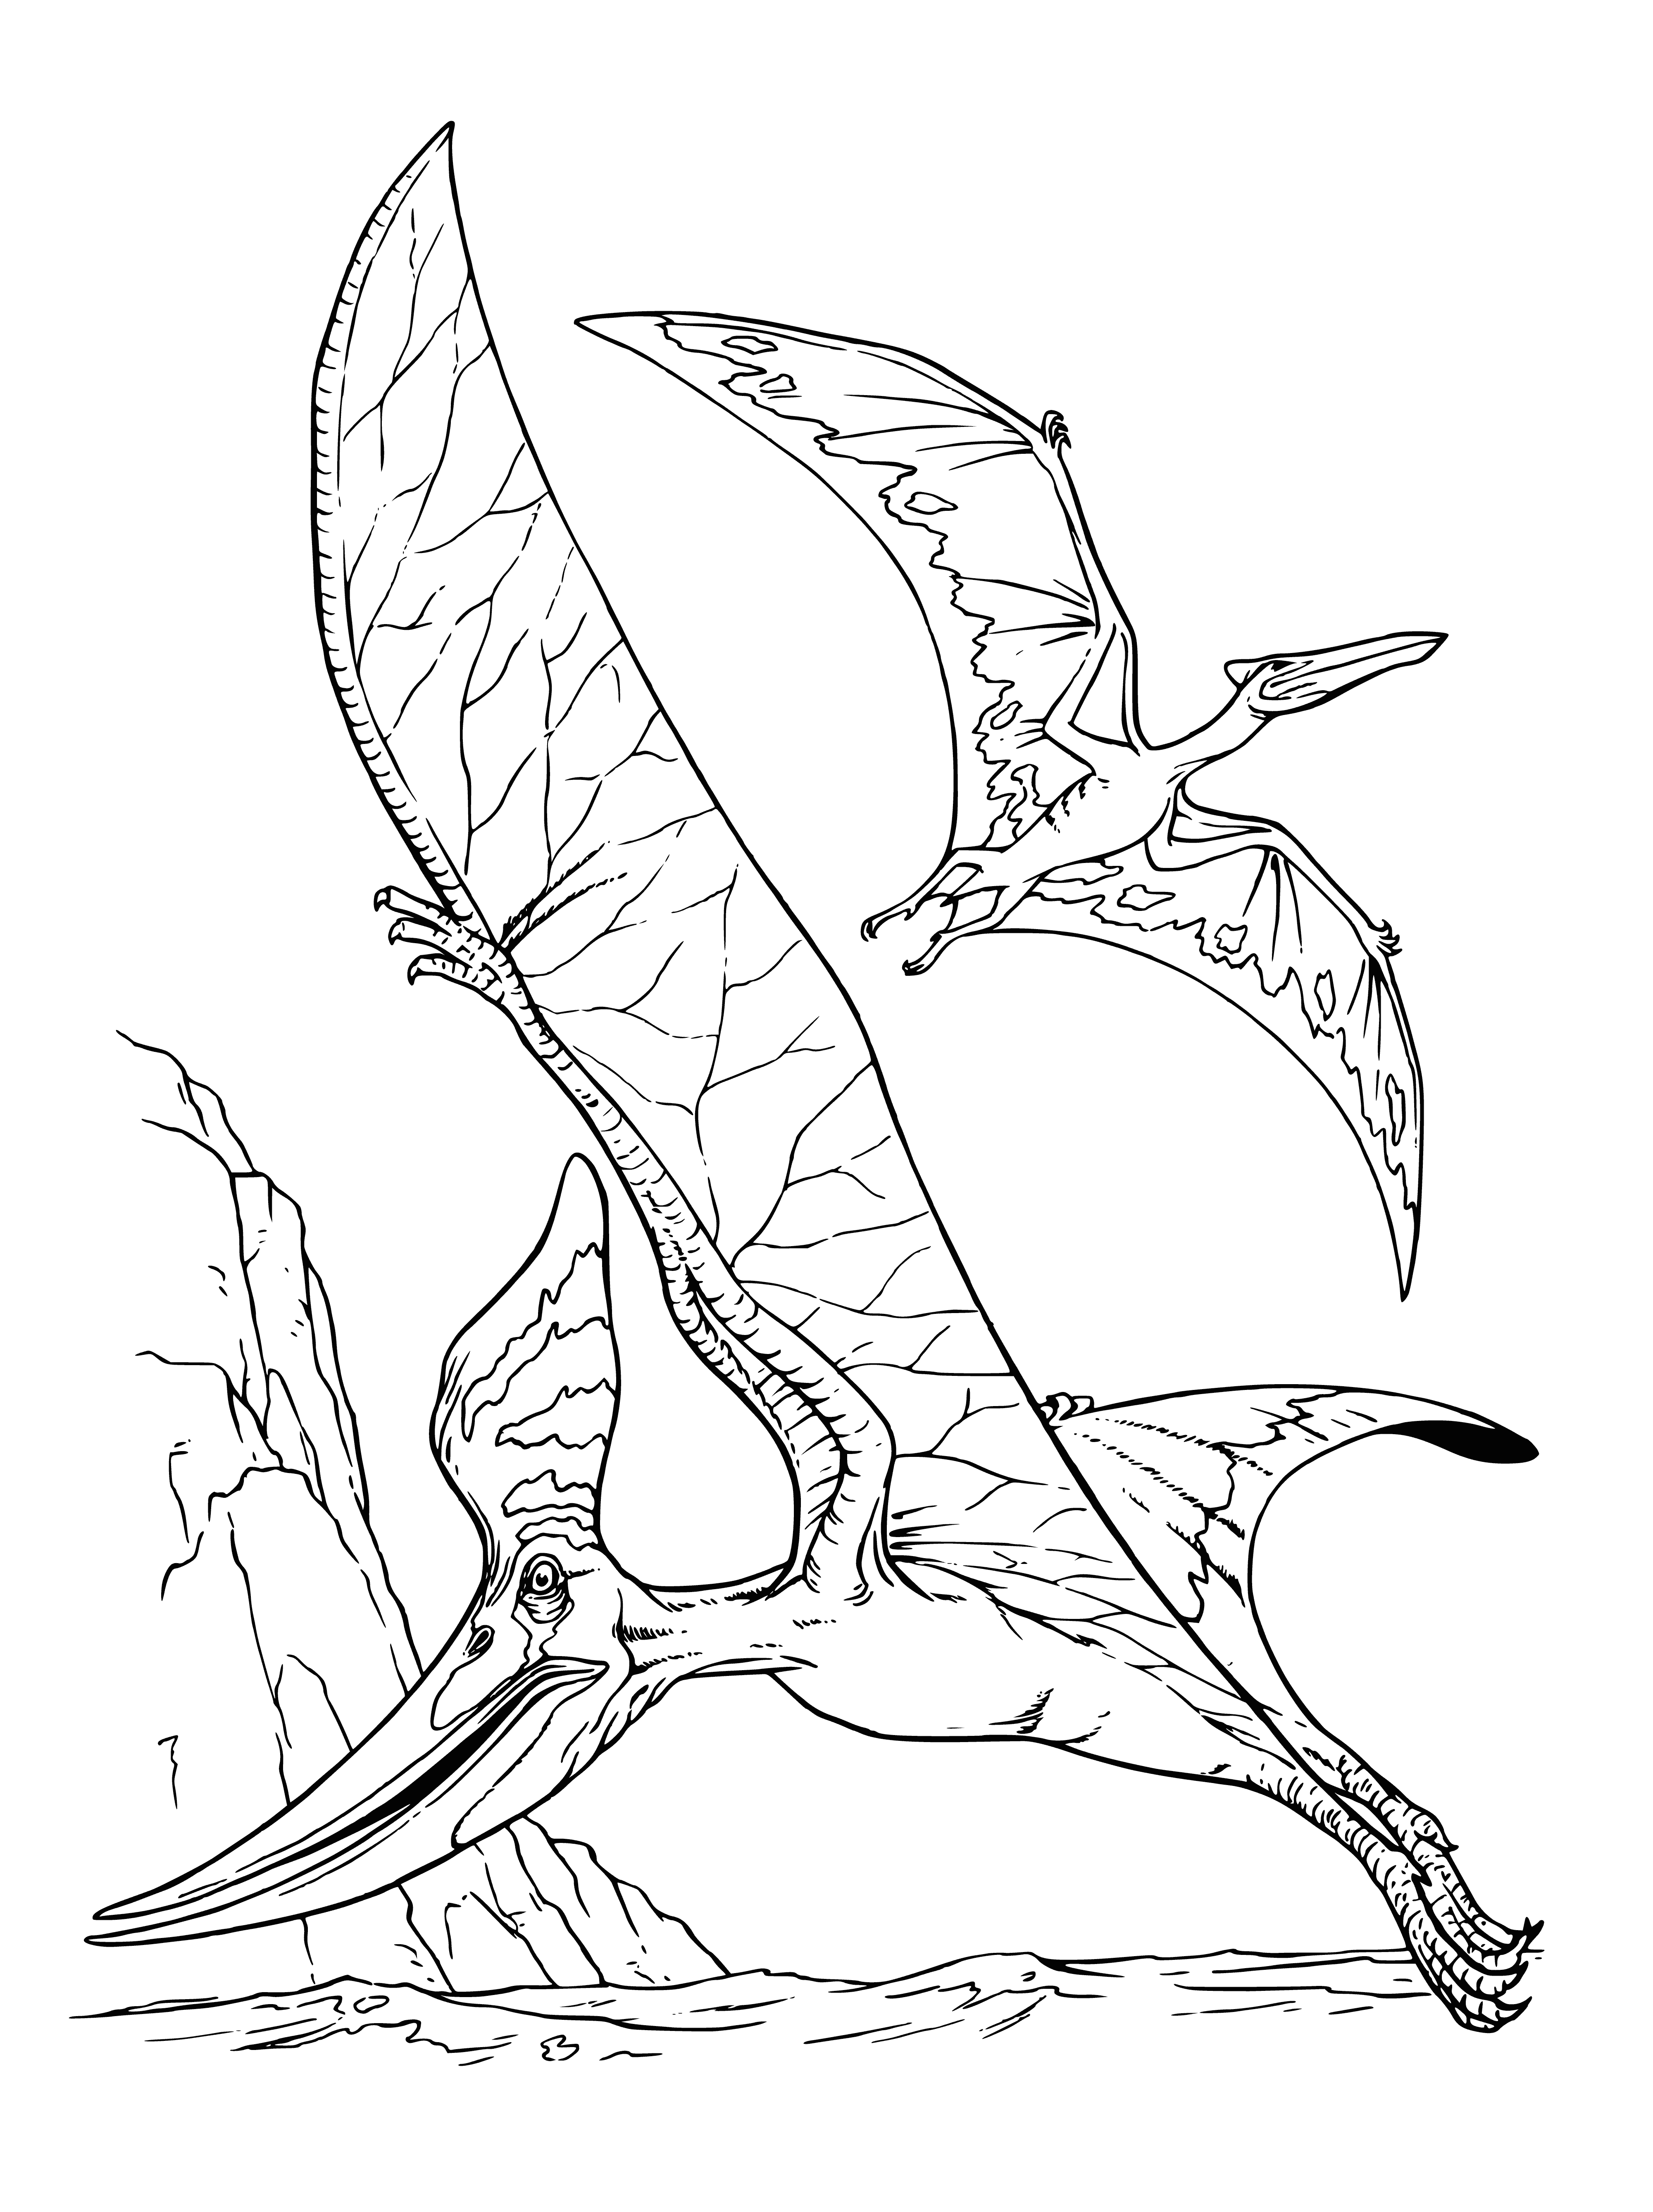 coloring page: Pteranodon is a large flying reptile with a long beak and crest; Pterodactyl is a smaller one with shorter beak and no crest.